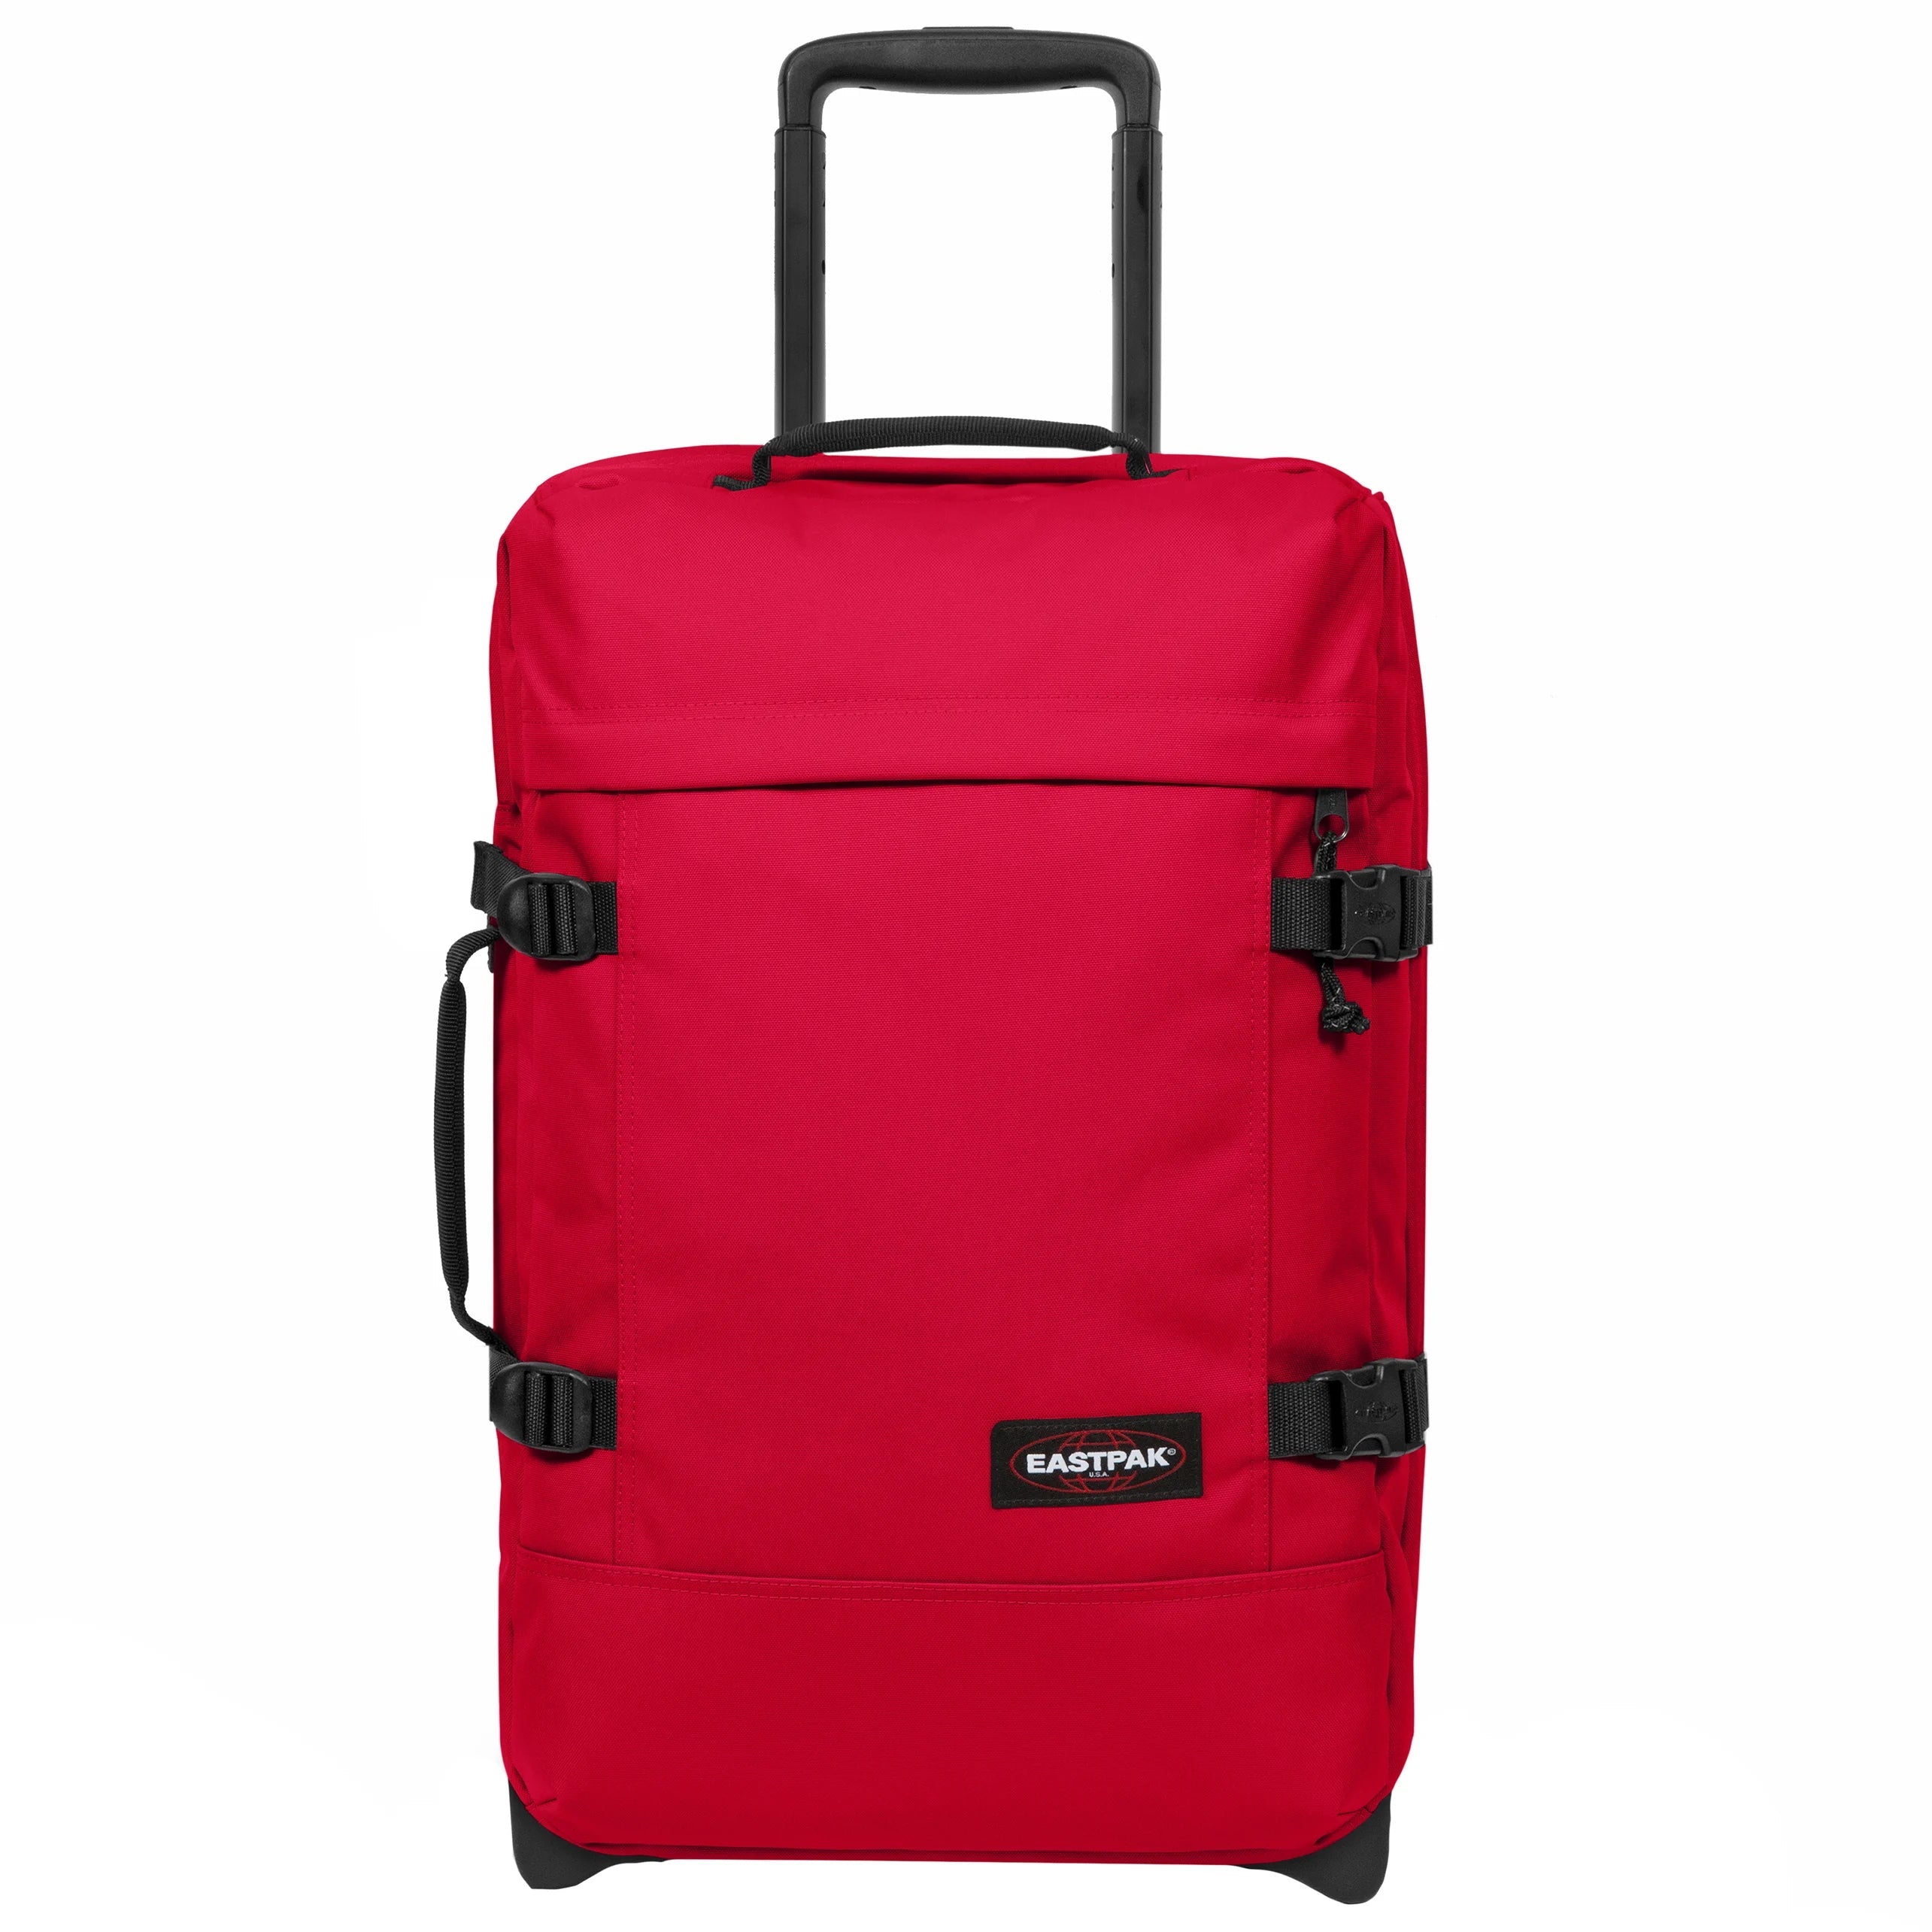 Eastpak Authentic Travel Tranverz 2-roll cabin trolley 51 cm - Sailor Red